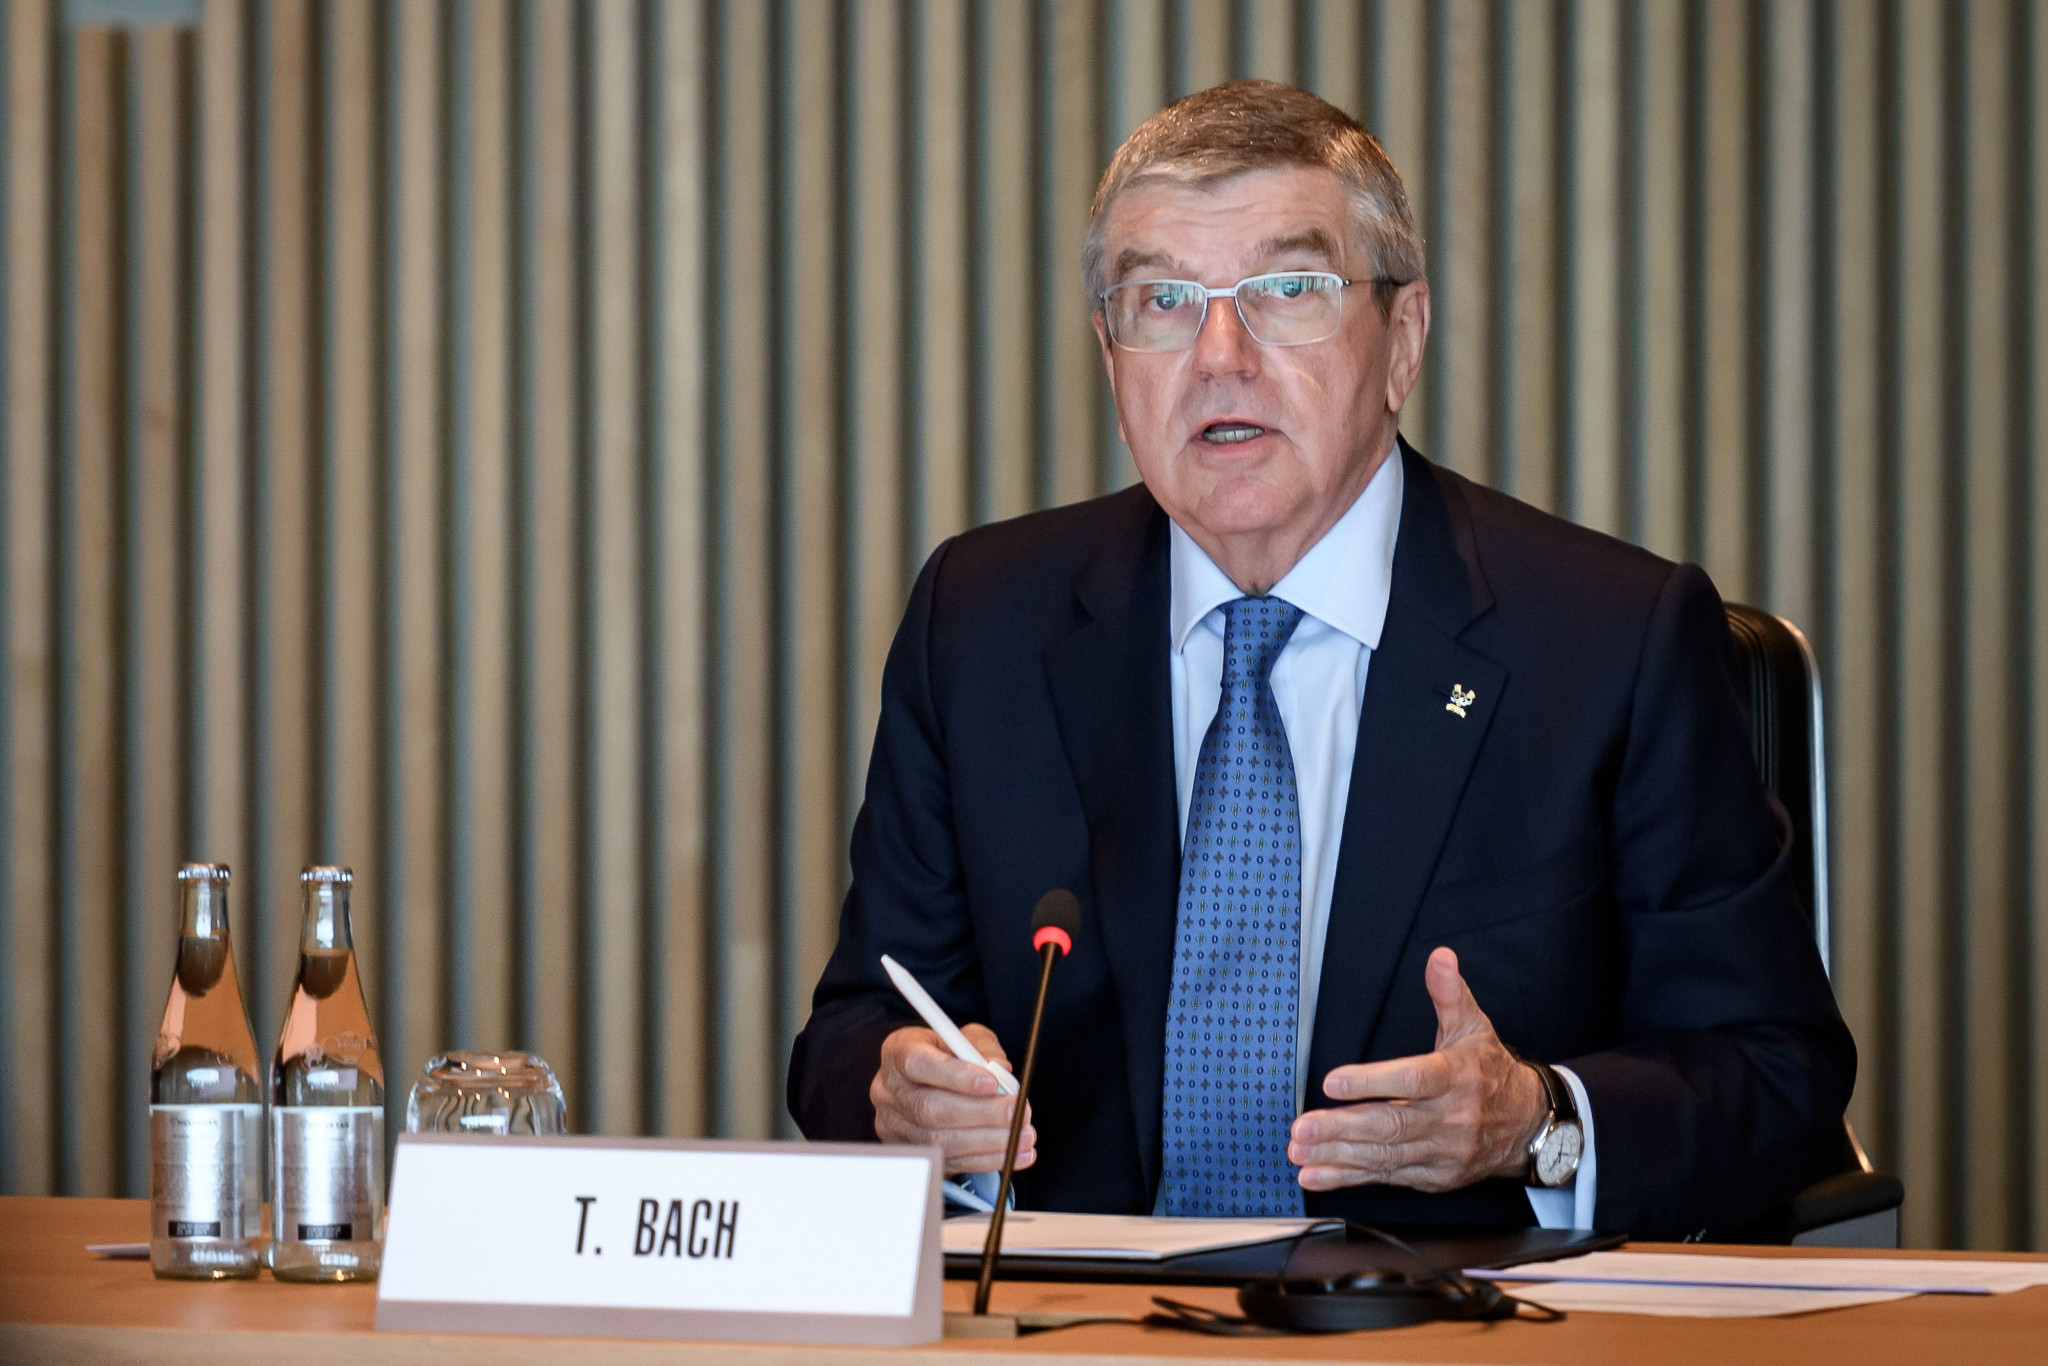 Bach consults with IOC members on consequences of pandemic